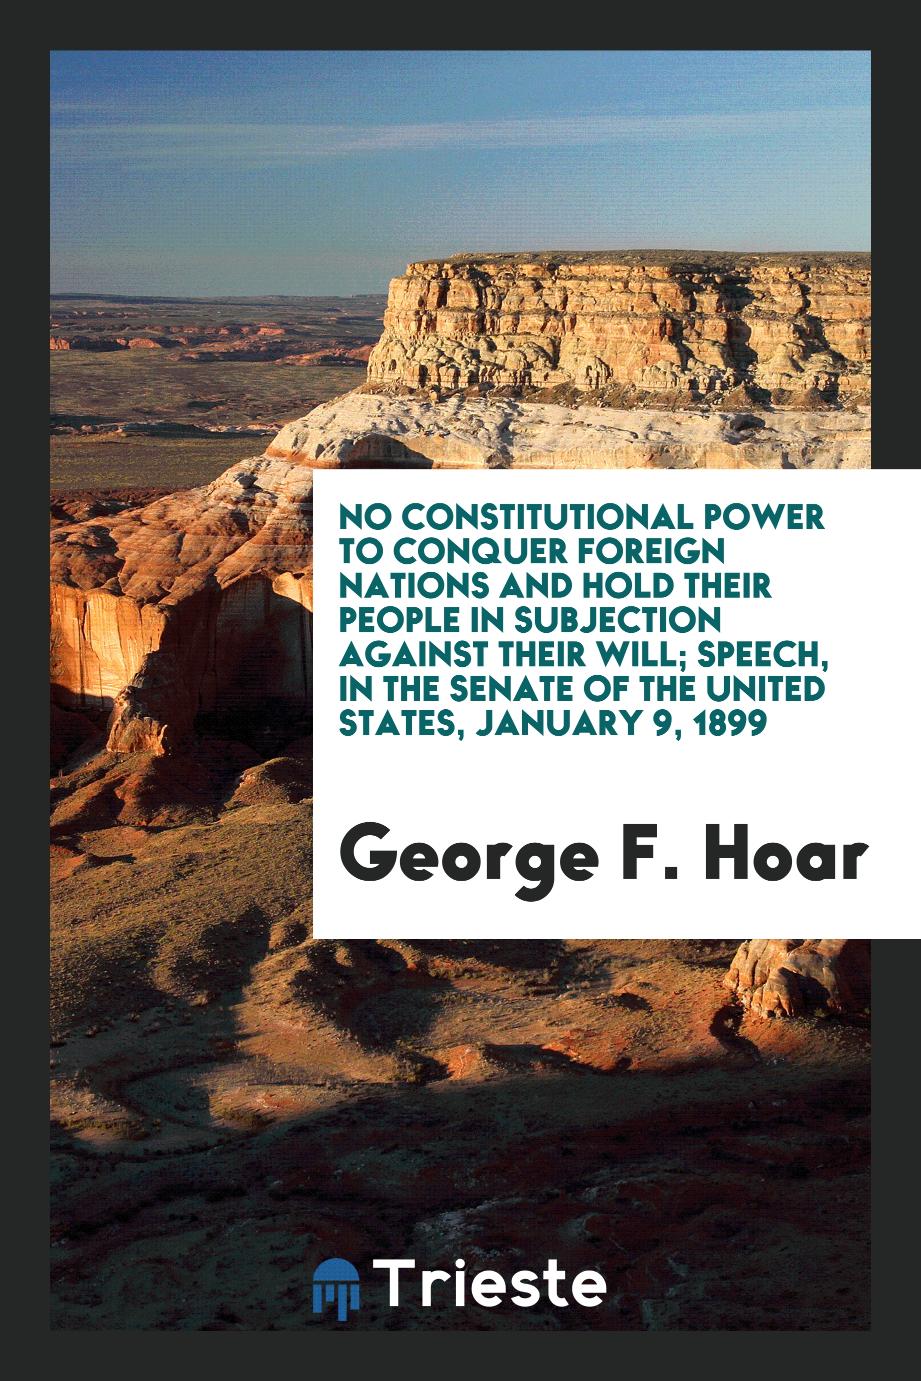 No Constitutional Power to Conquer Foreign Nations and Hold Their People in subjection against their will; Speech, in the Senate of the United States, January 9, 1899